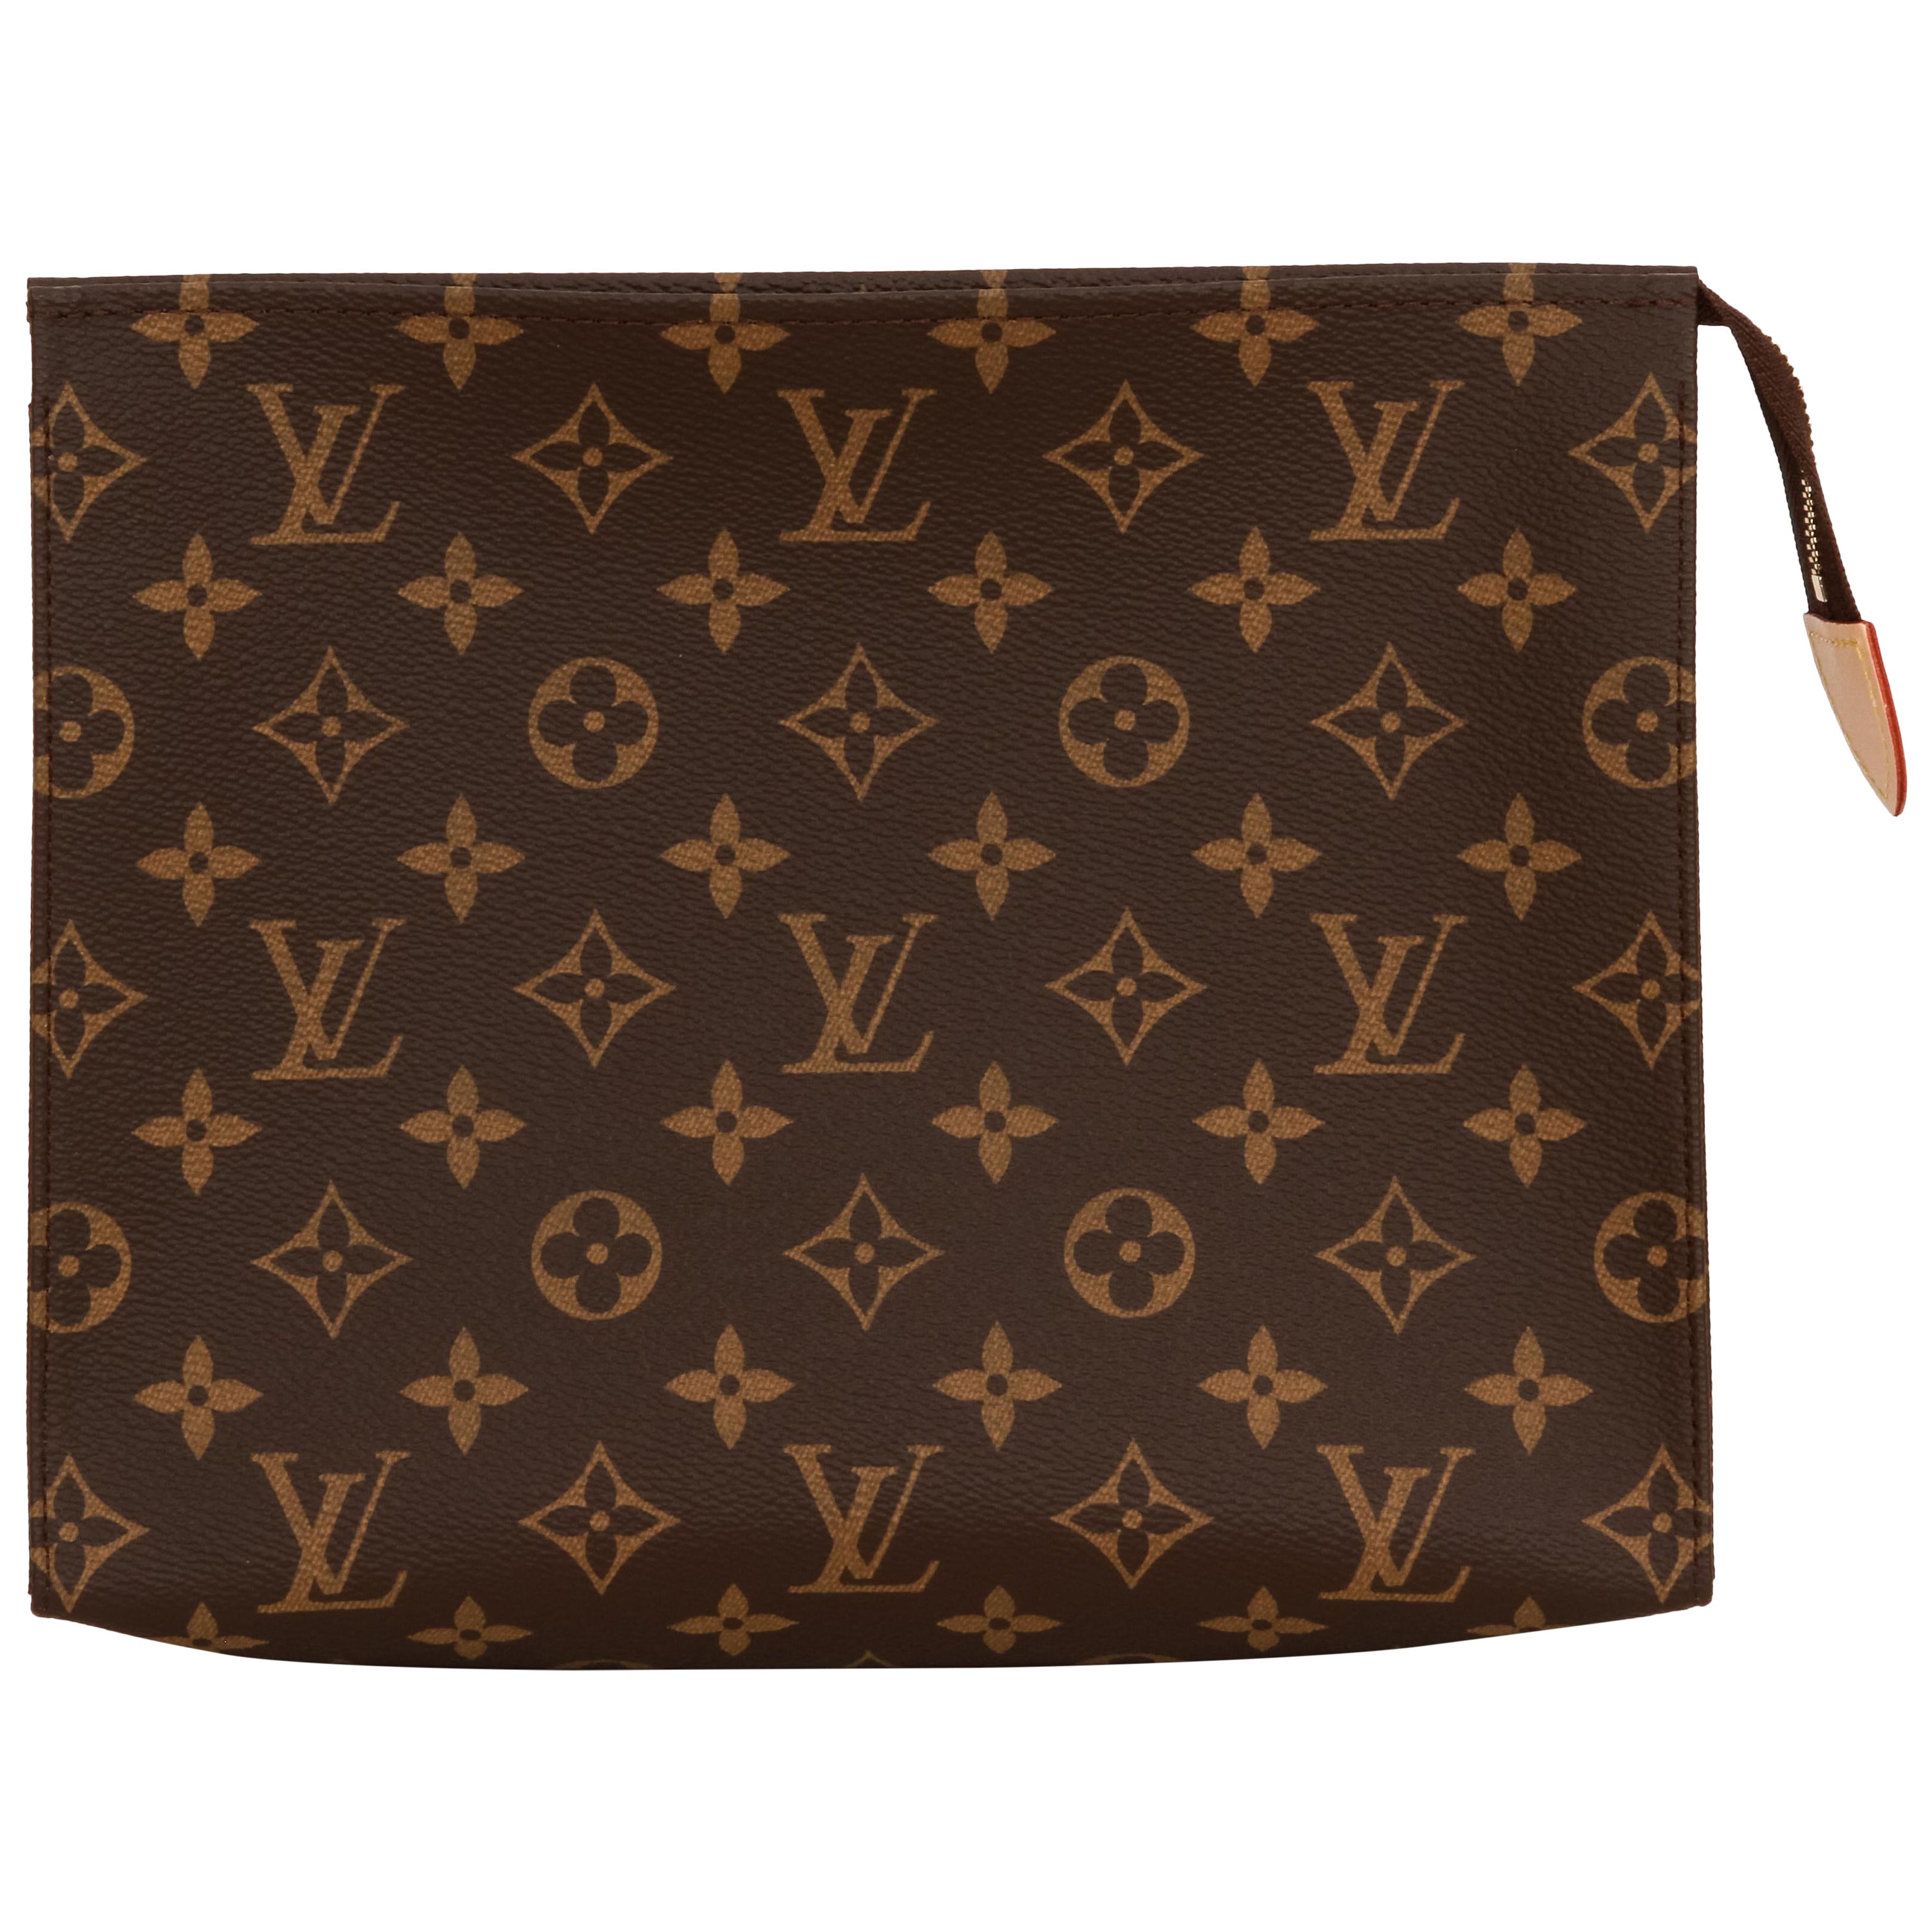 New Louis Vuitton Monogram Toiletry Clutch in Box For Sale